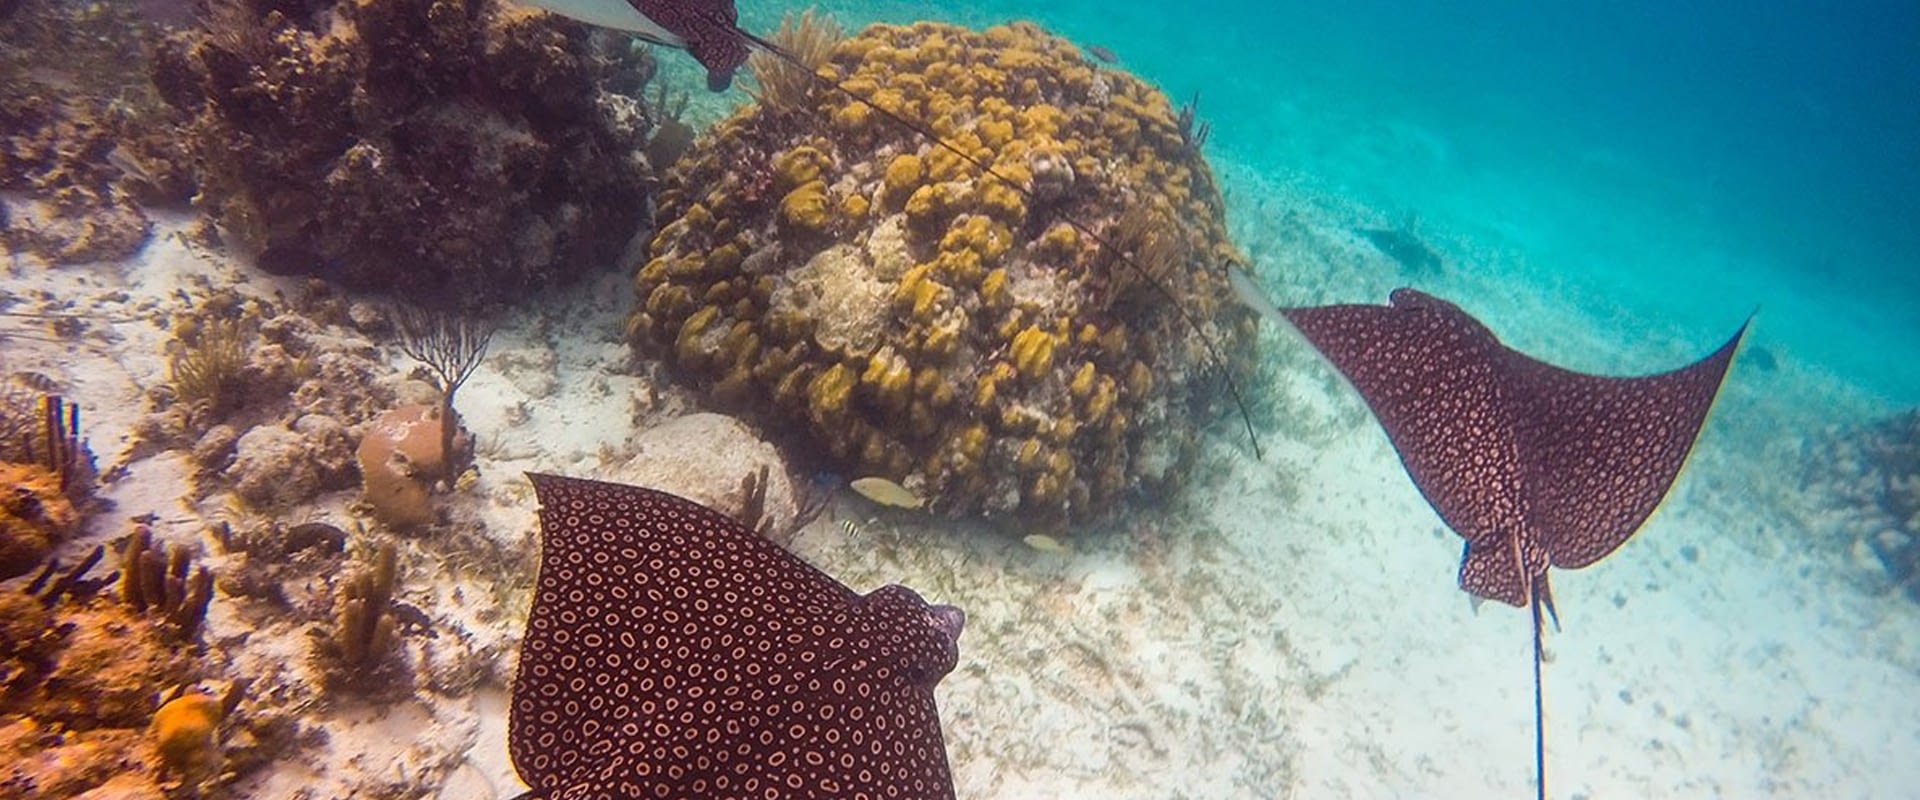 Half Day Snorkeling at Mexico Rocks in Ambergris Caye, Belize